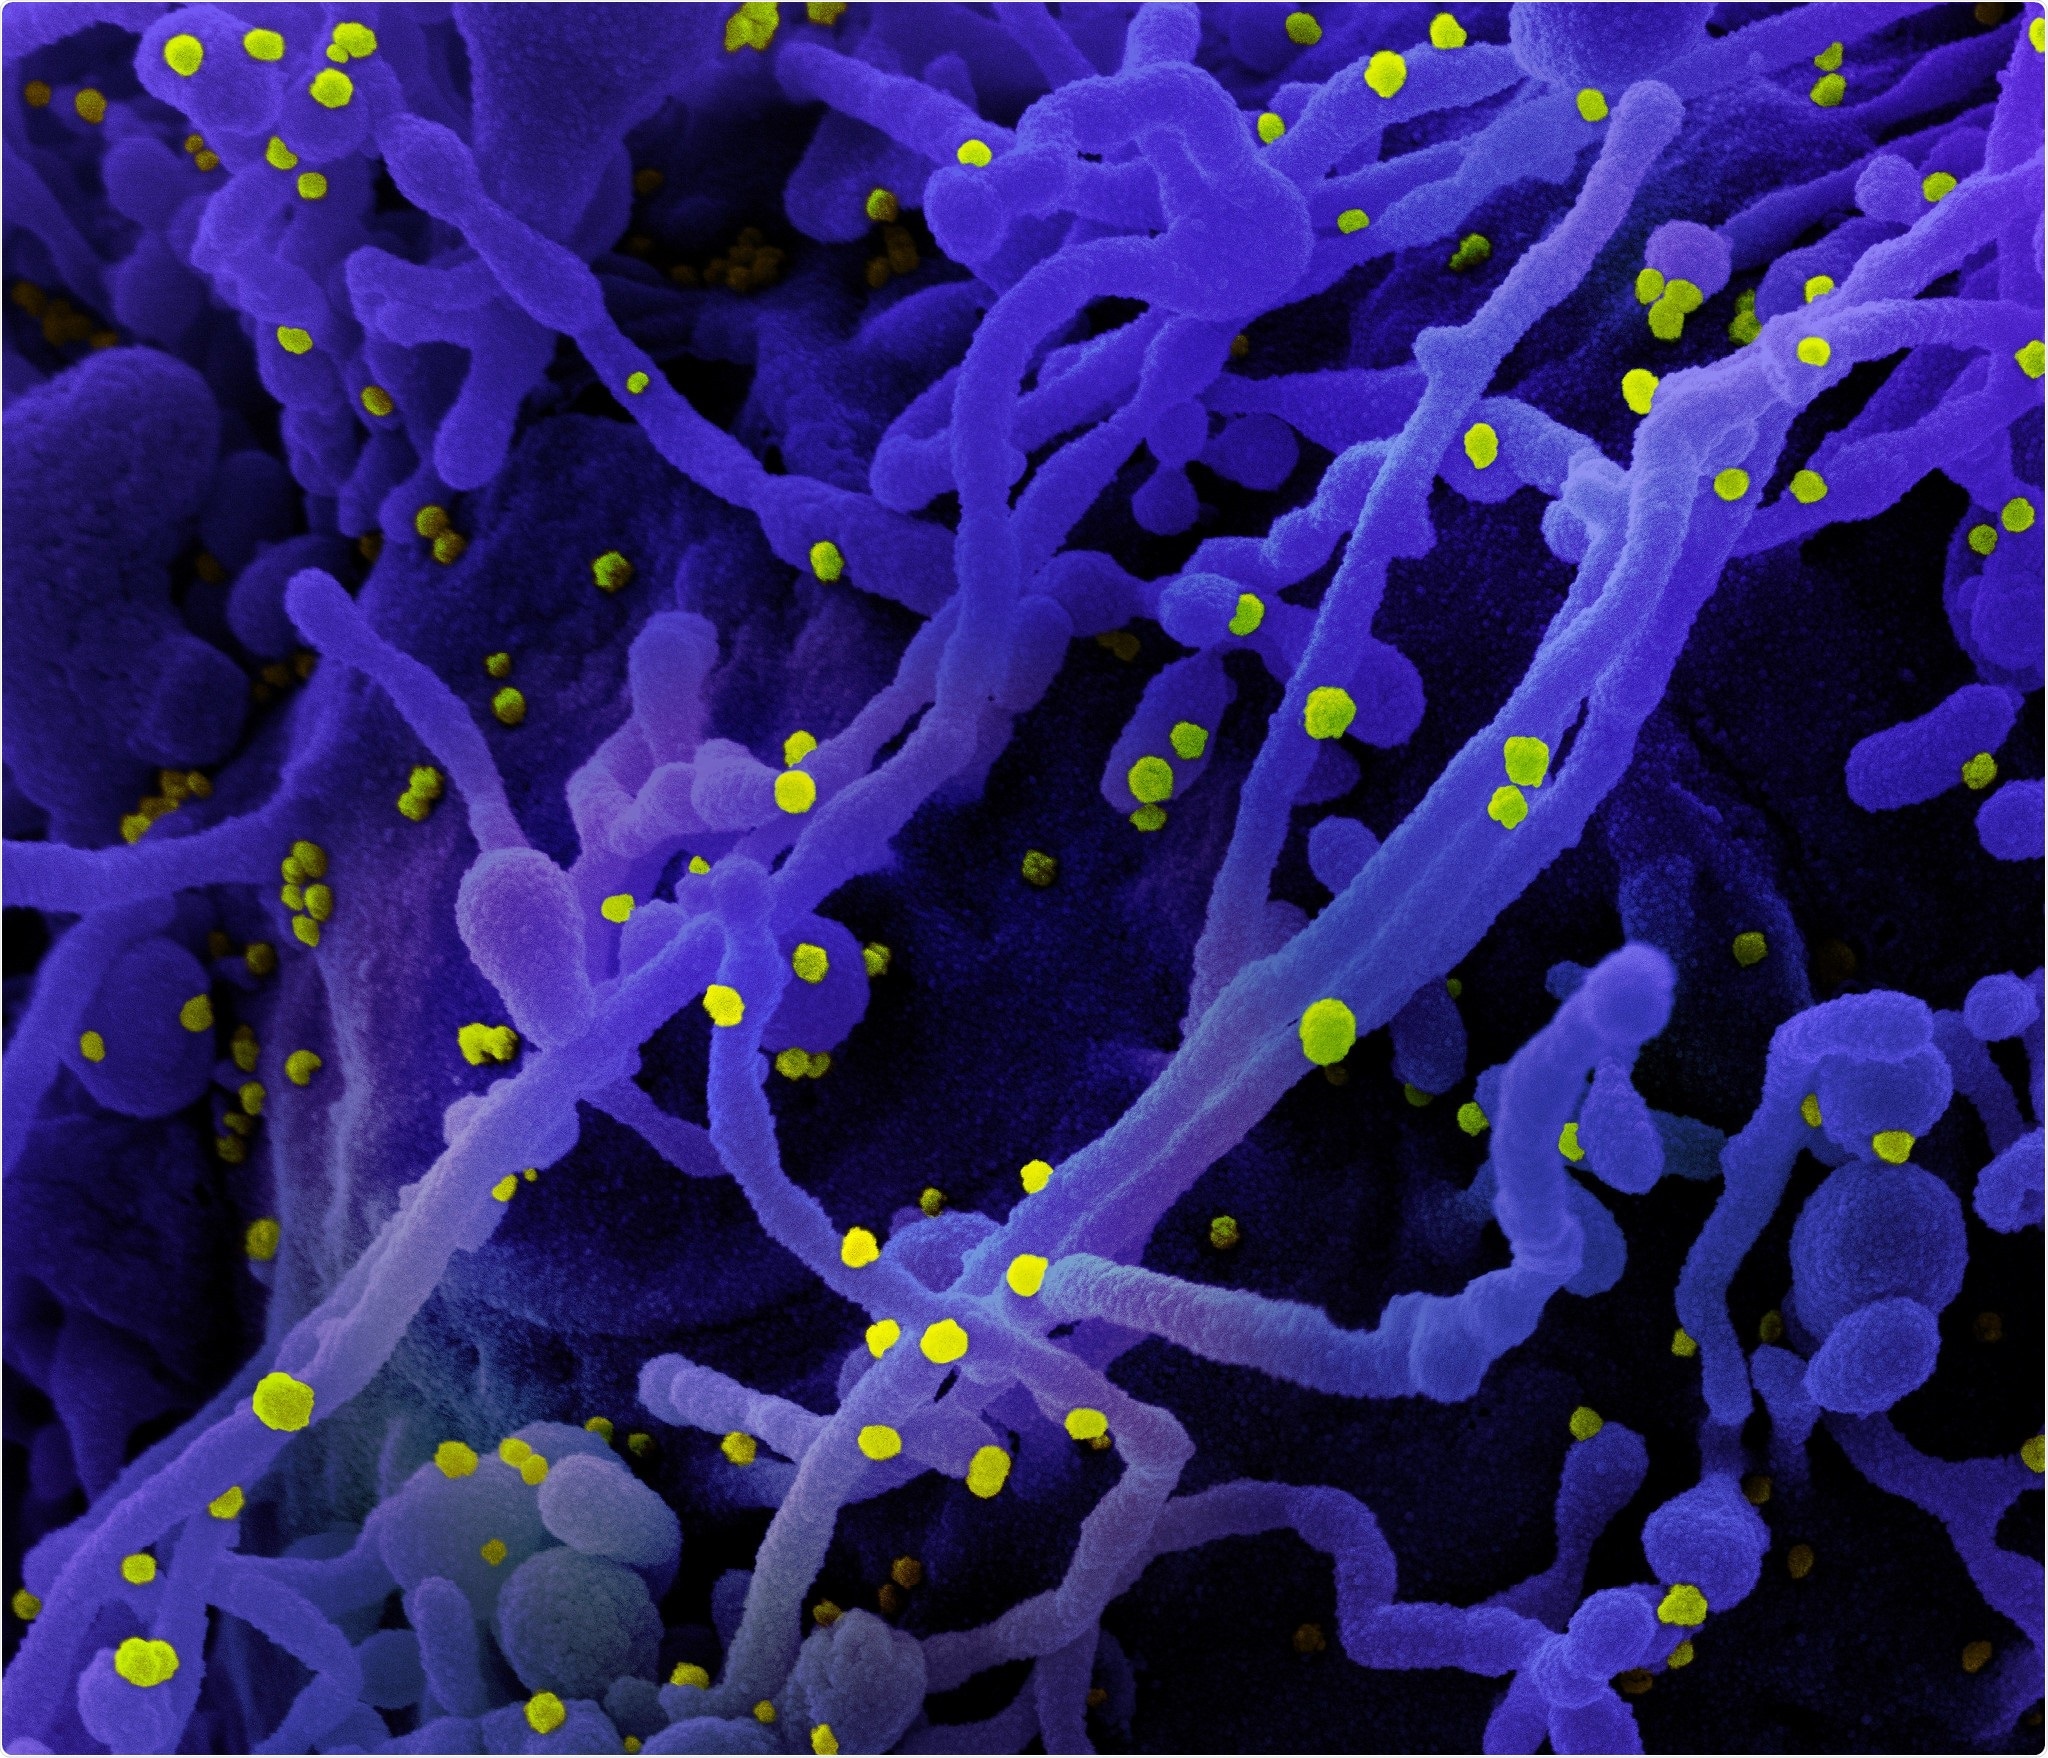 Colored scanning electron micrographs of cells infected with SARS-CoV-2 virus particles (yellow) (purple) isolated from patient samples. Image taken at the NIAID Integrated Research Facility (IRF) in Fort Detrick, Maryland. Credit: NIAID